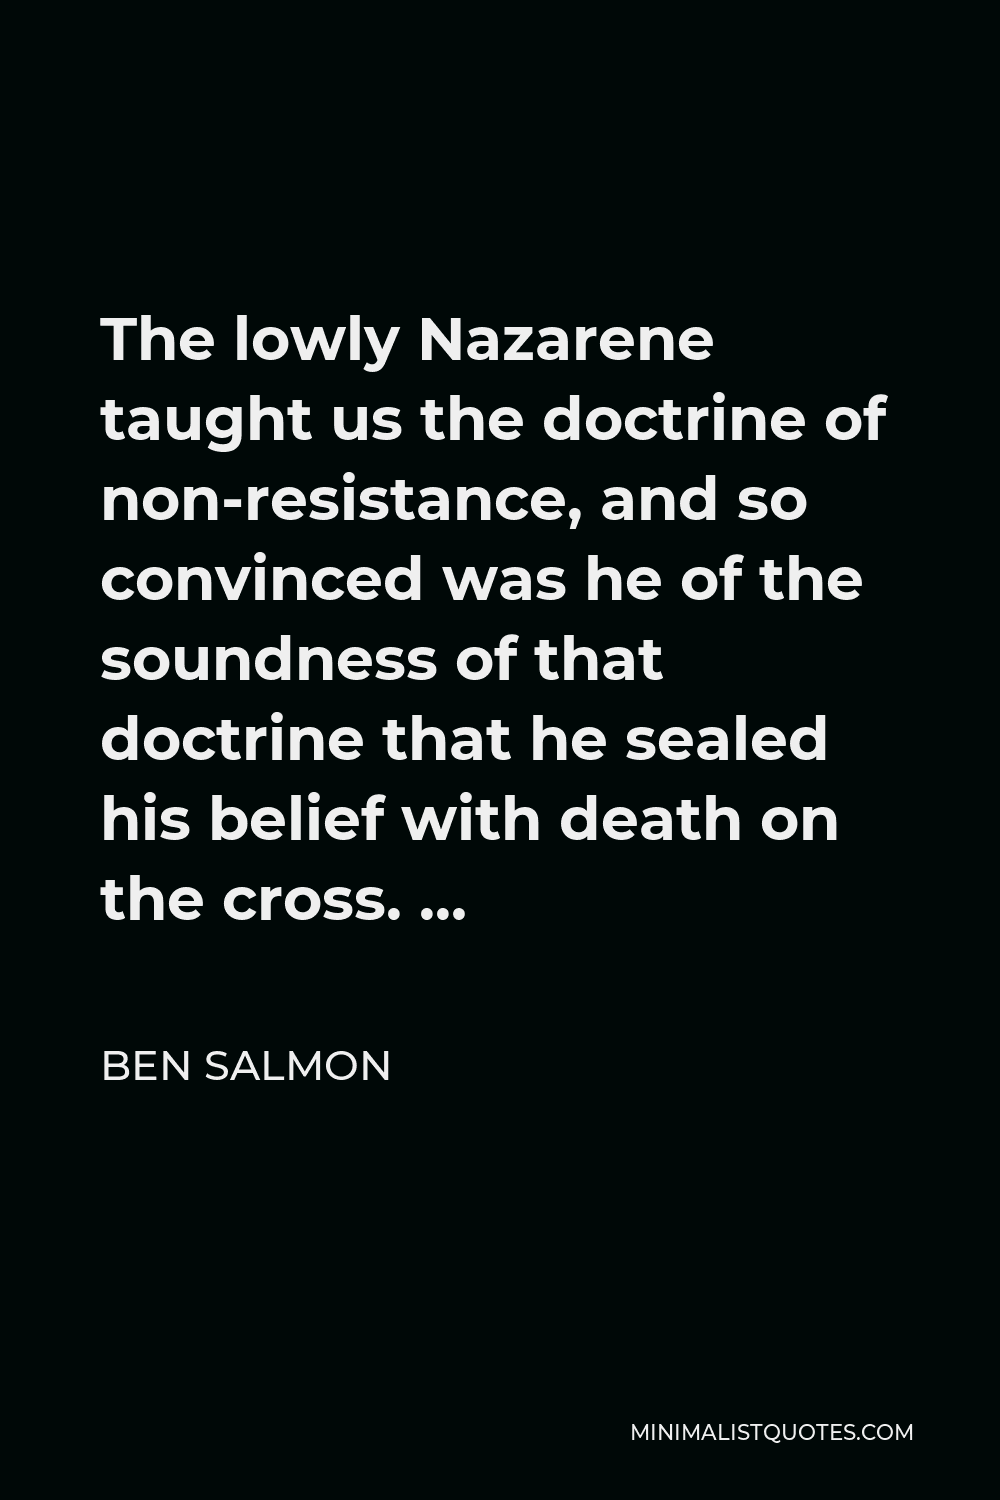 Ben Salmon Quote - The lowly Nazarene taught us the doctrine of non-resistance, and so convinced was he of the soundness of that doctrine that he sealed his belief with death on the cross. …